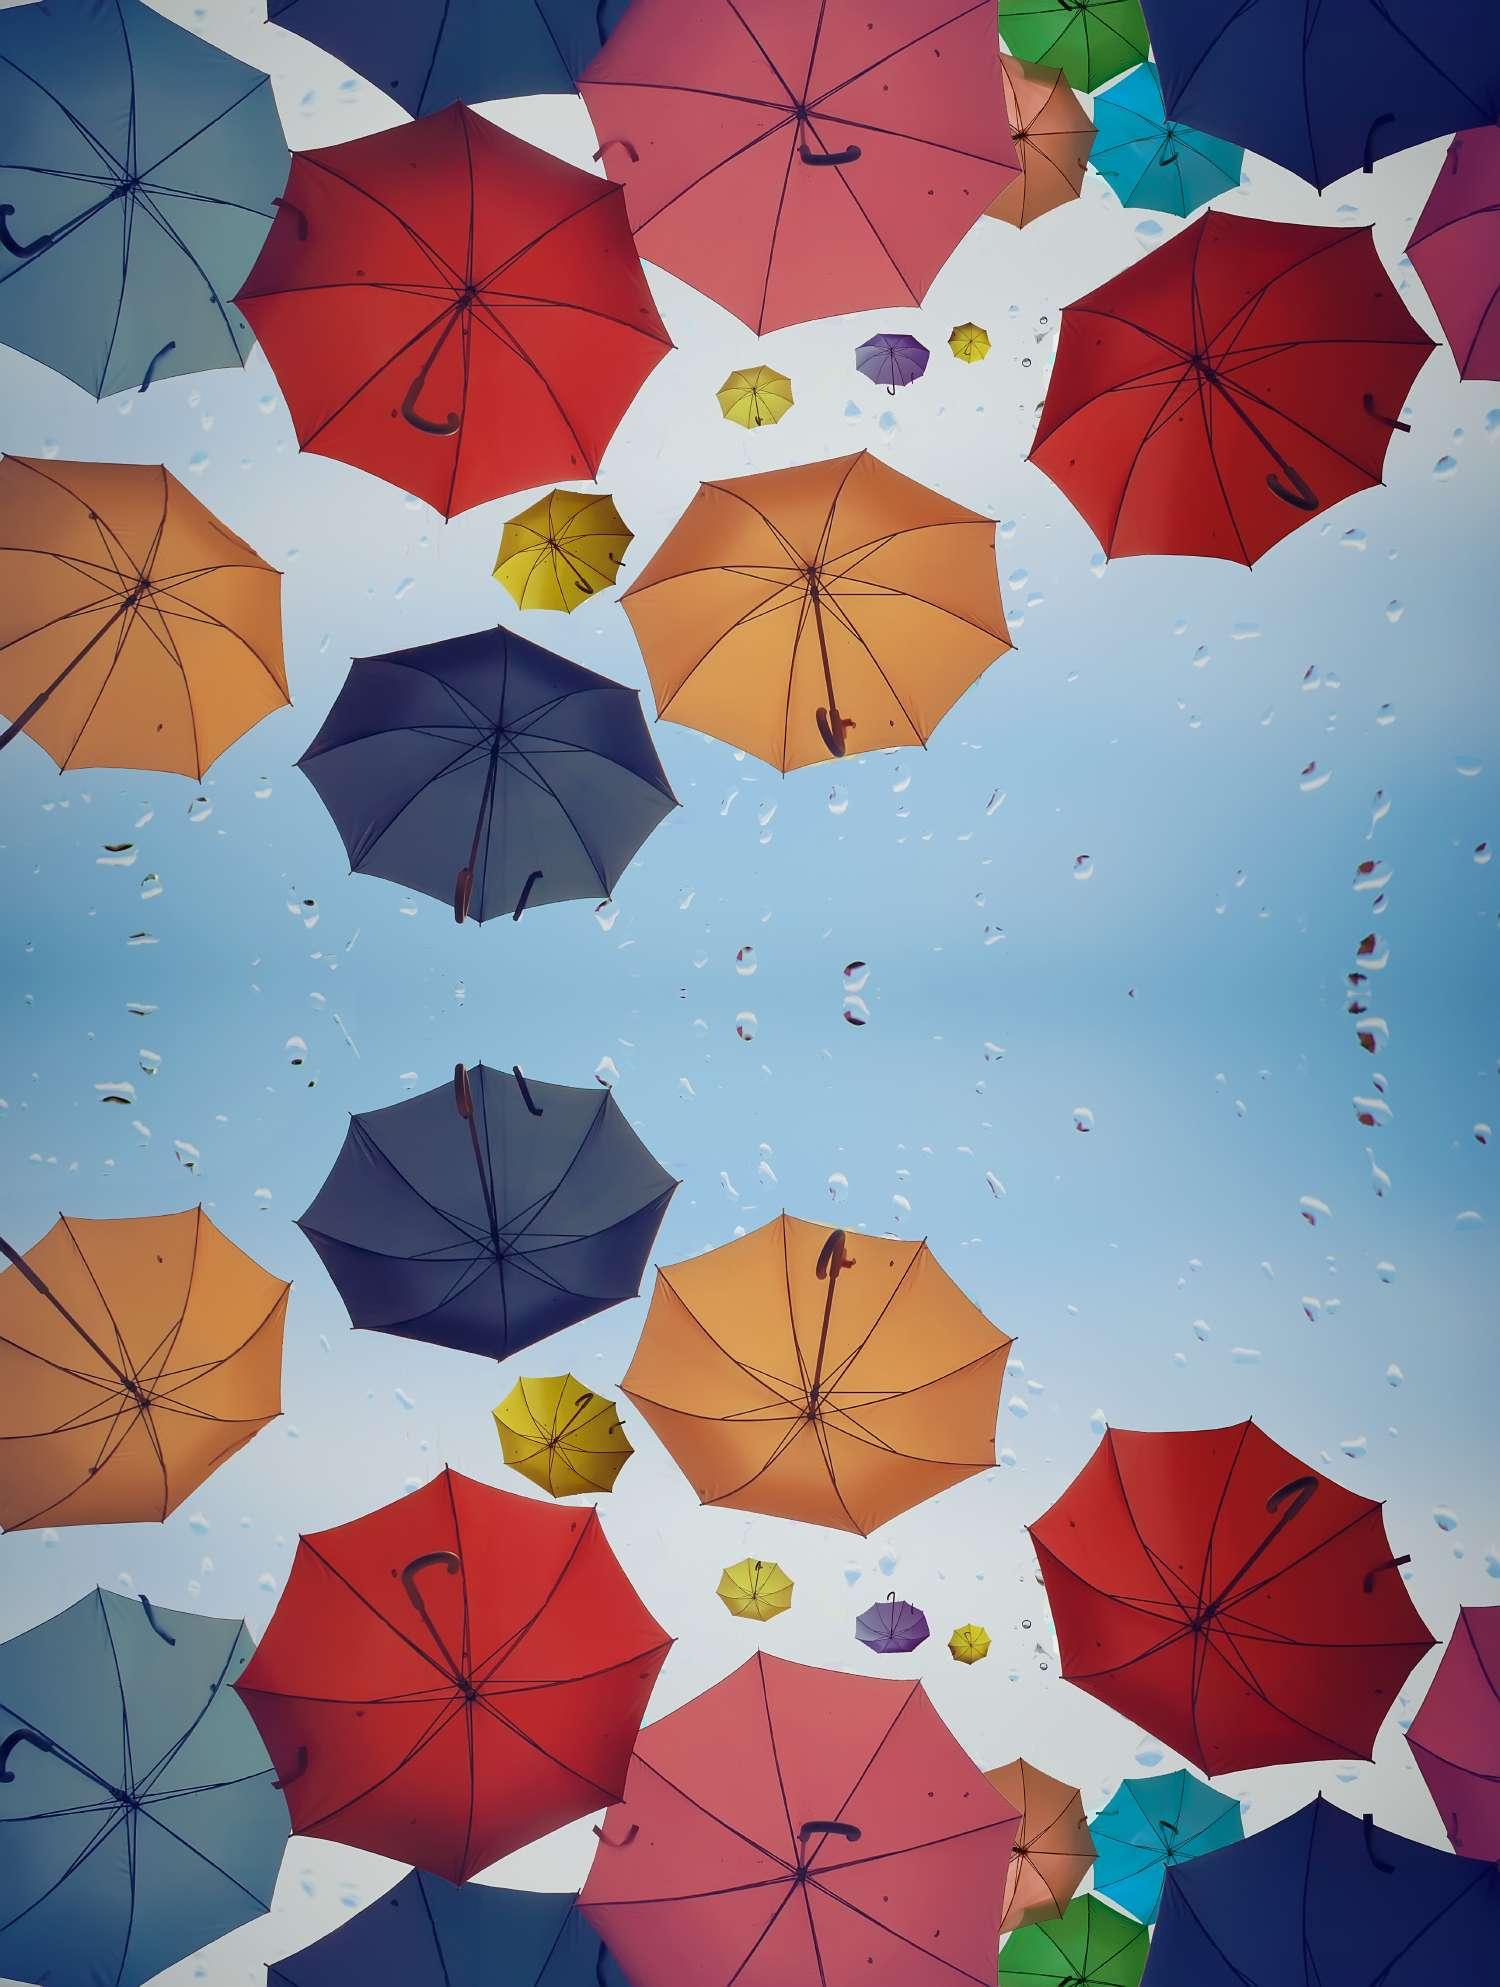 Colorful umbrellas floating in the air on a rainy day